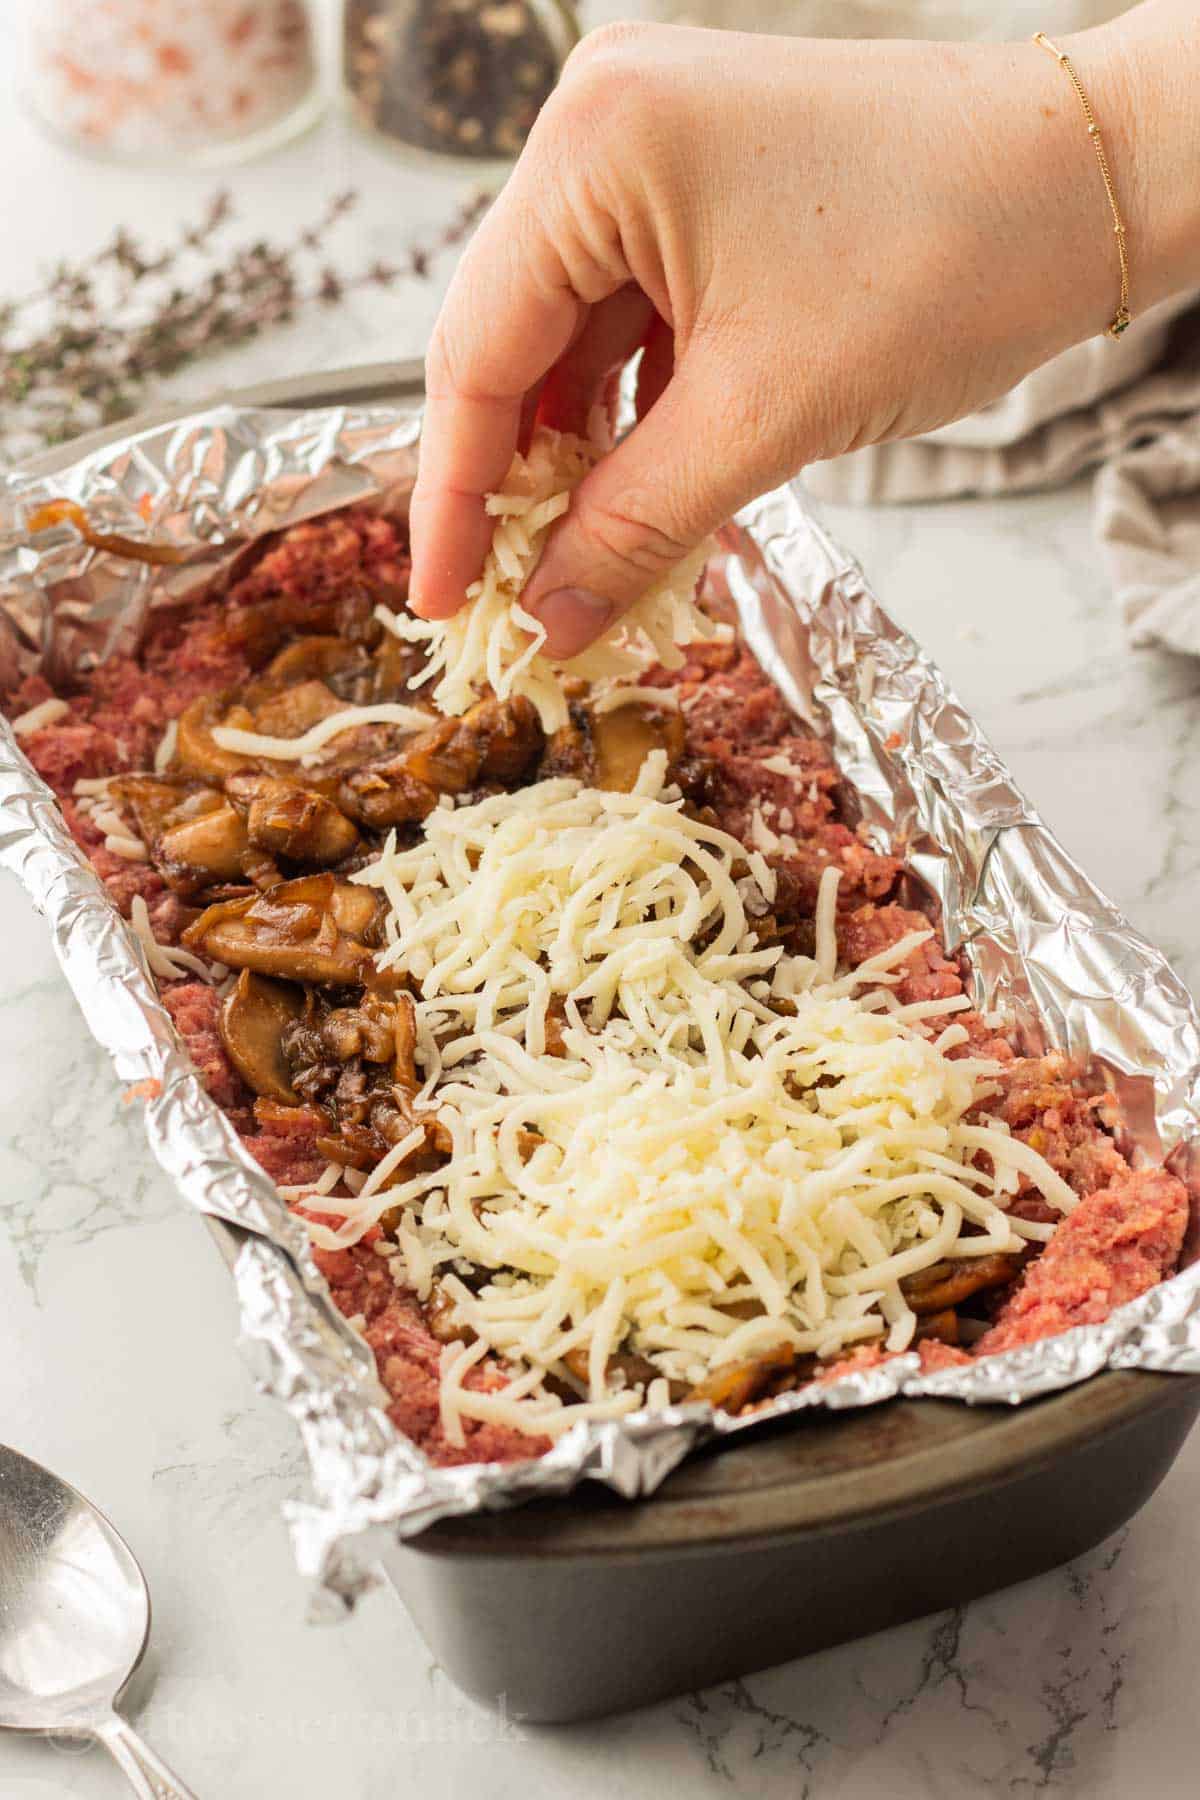 Hand sprinkling cheese onto cooked onions and mushrooms in raw beef in metal pan.